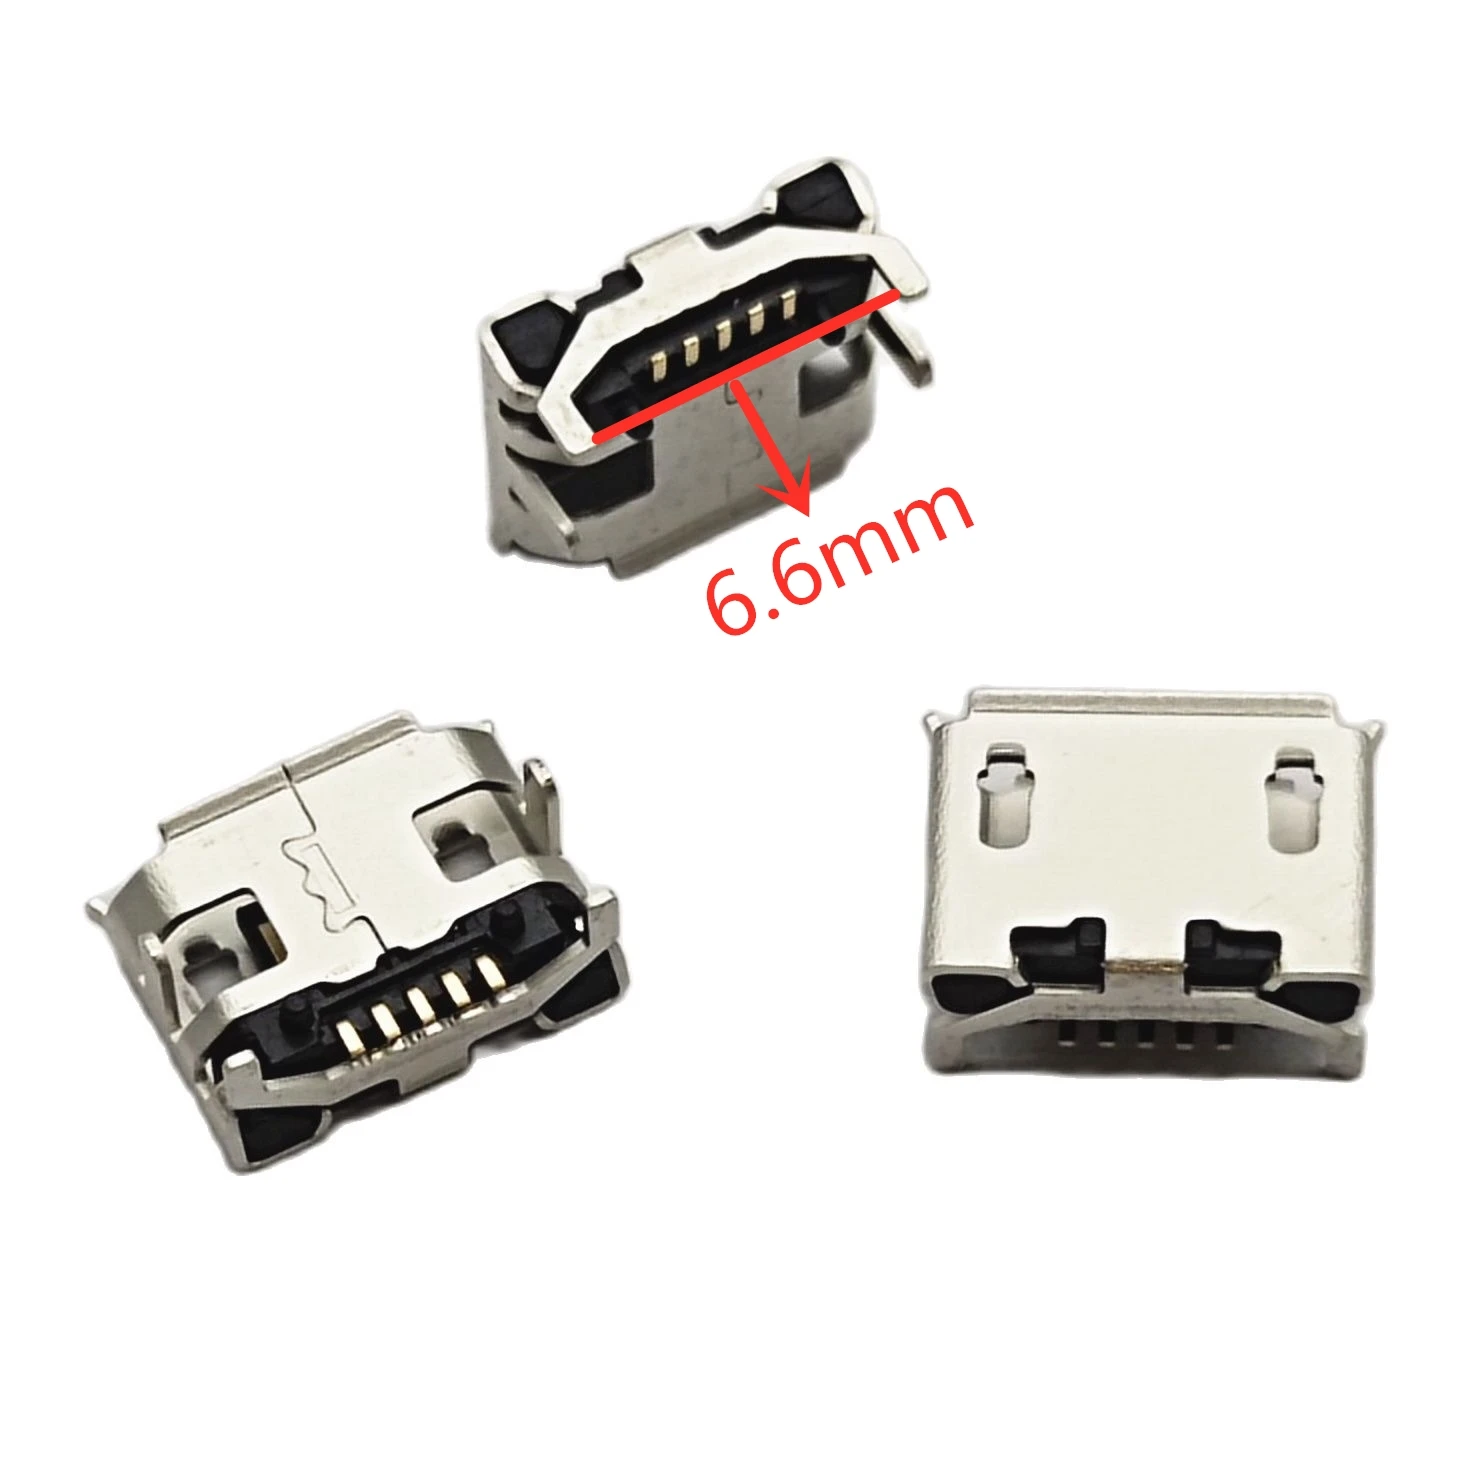 50pcs for Micro USB Connector 5pin Big Ox horn 6.6mm DIP4 Mini usb Connector Four legs For Mobile phone charging tail socket